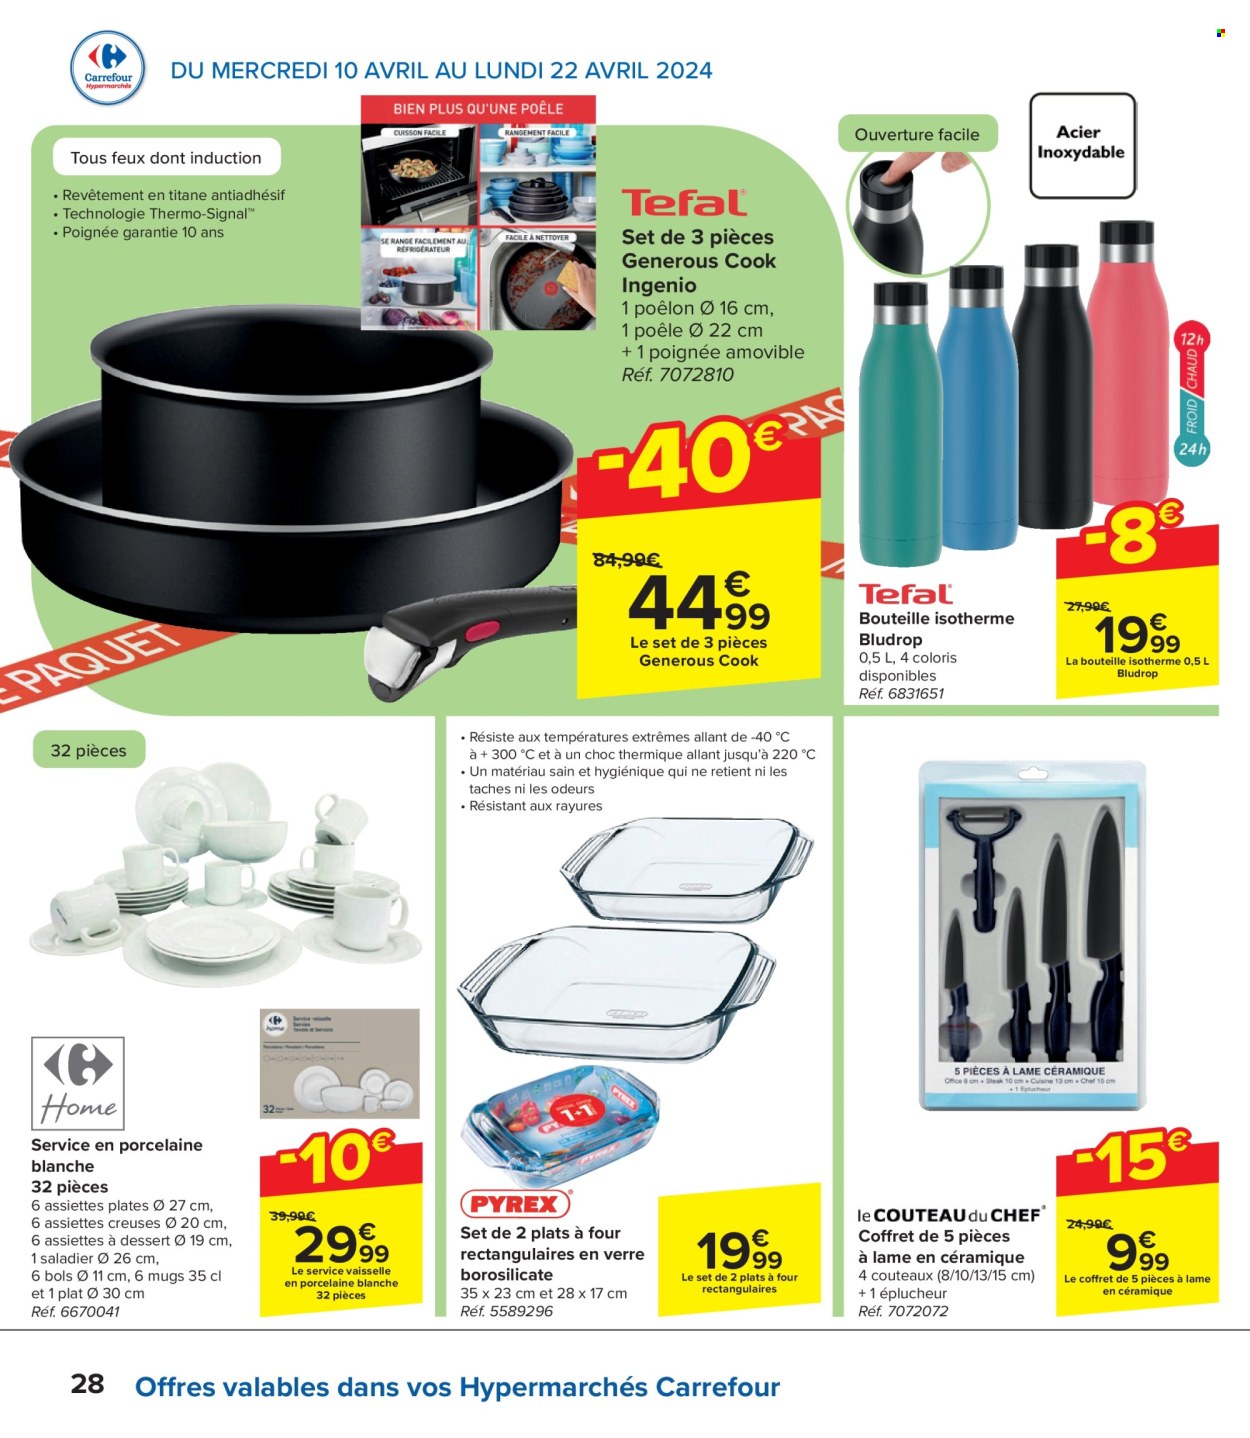 Catalogue Carrefour hypermarkt - 10.4.2024 - 22.4.2024. Page 28.